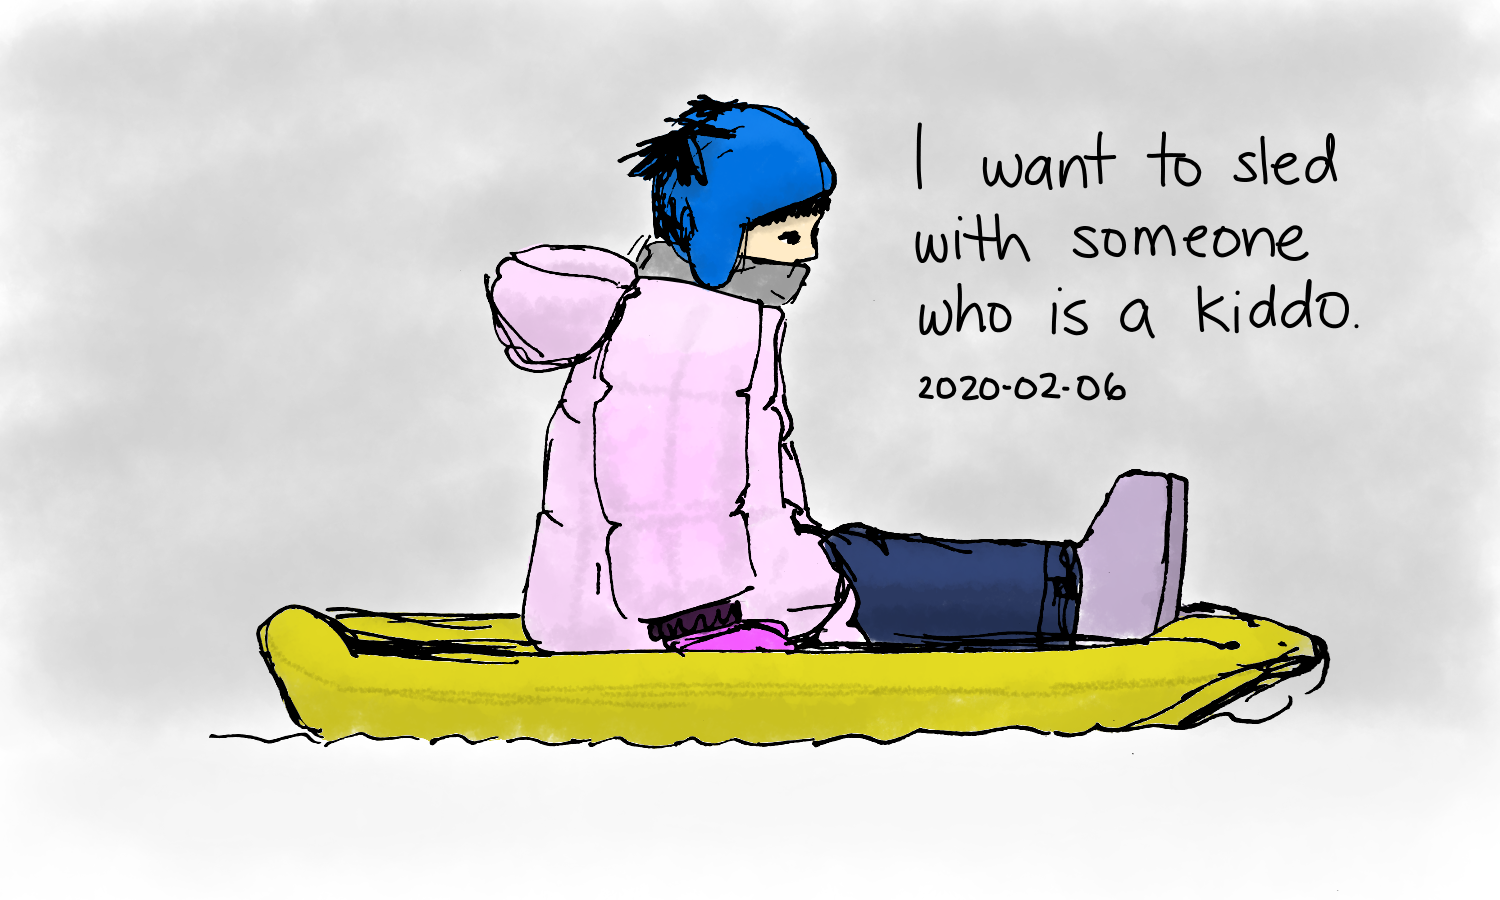 2020-02-06 I want to sled with someone who is a kiddo #moment #sketch.png